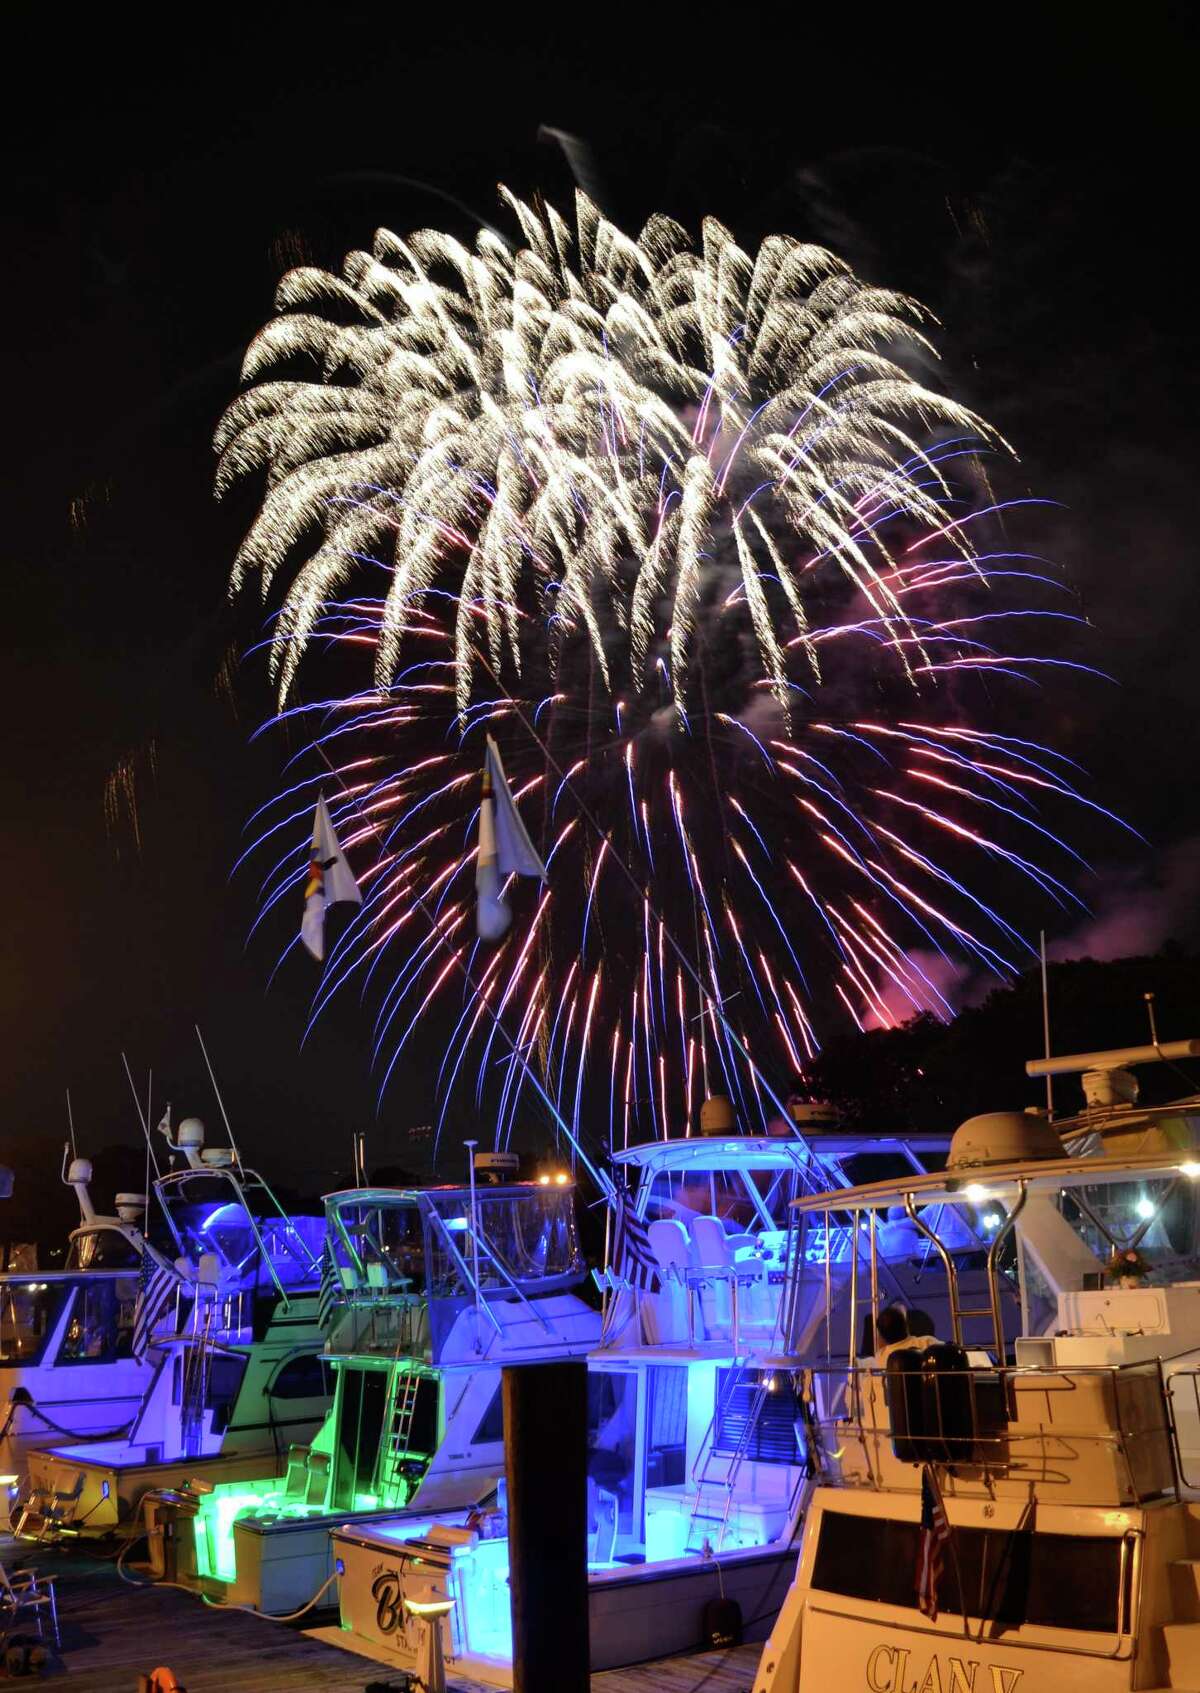 Milford will host its start-of-summer celebration — featuring live bands, food trucks and fireworks — June 25, 2022, at Lisman’s Landing.